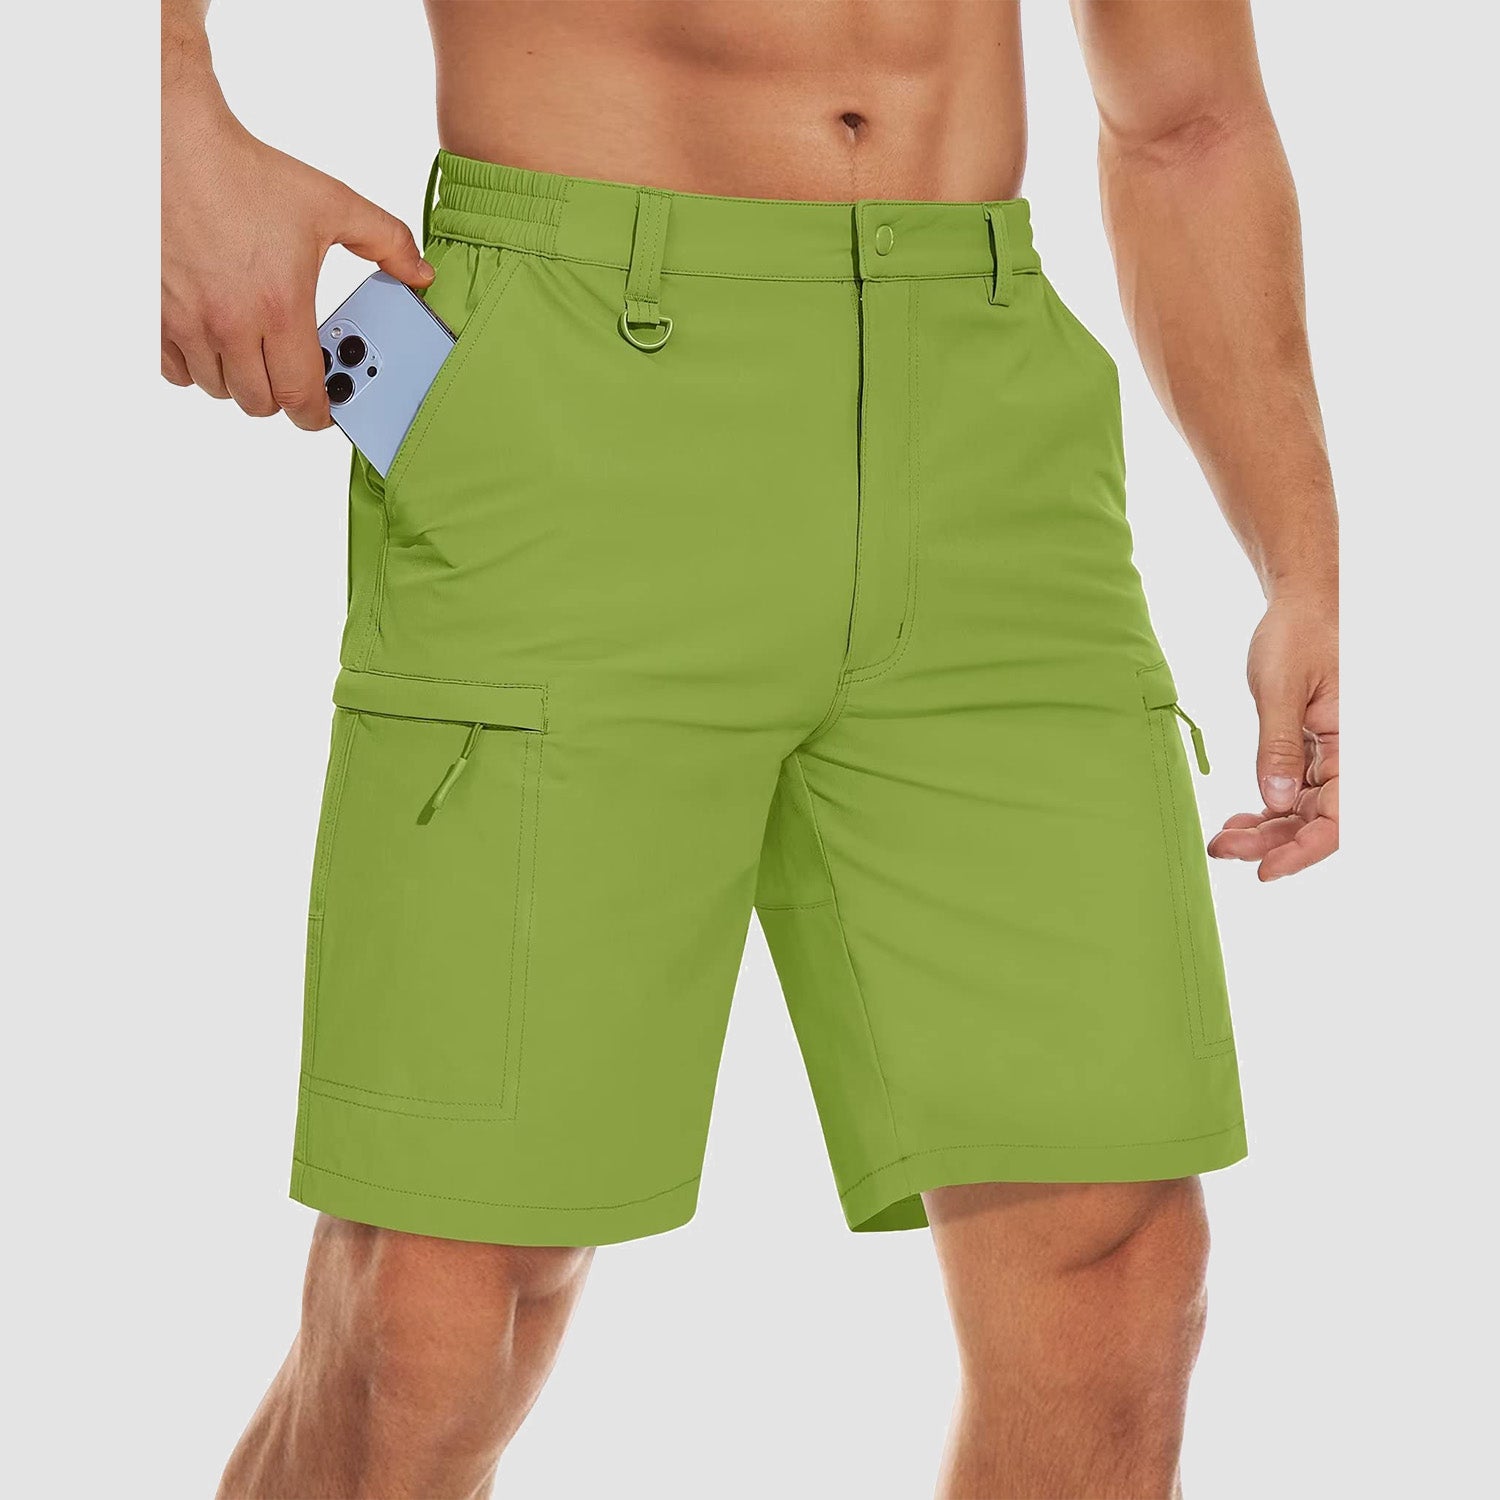 【Buy 4 Get 4th Free】Men's Shorts Quick Dry Sports Shorts, Army Green / 36